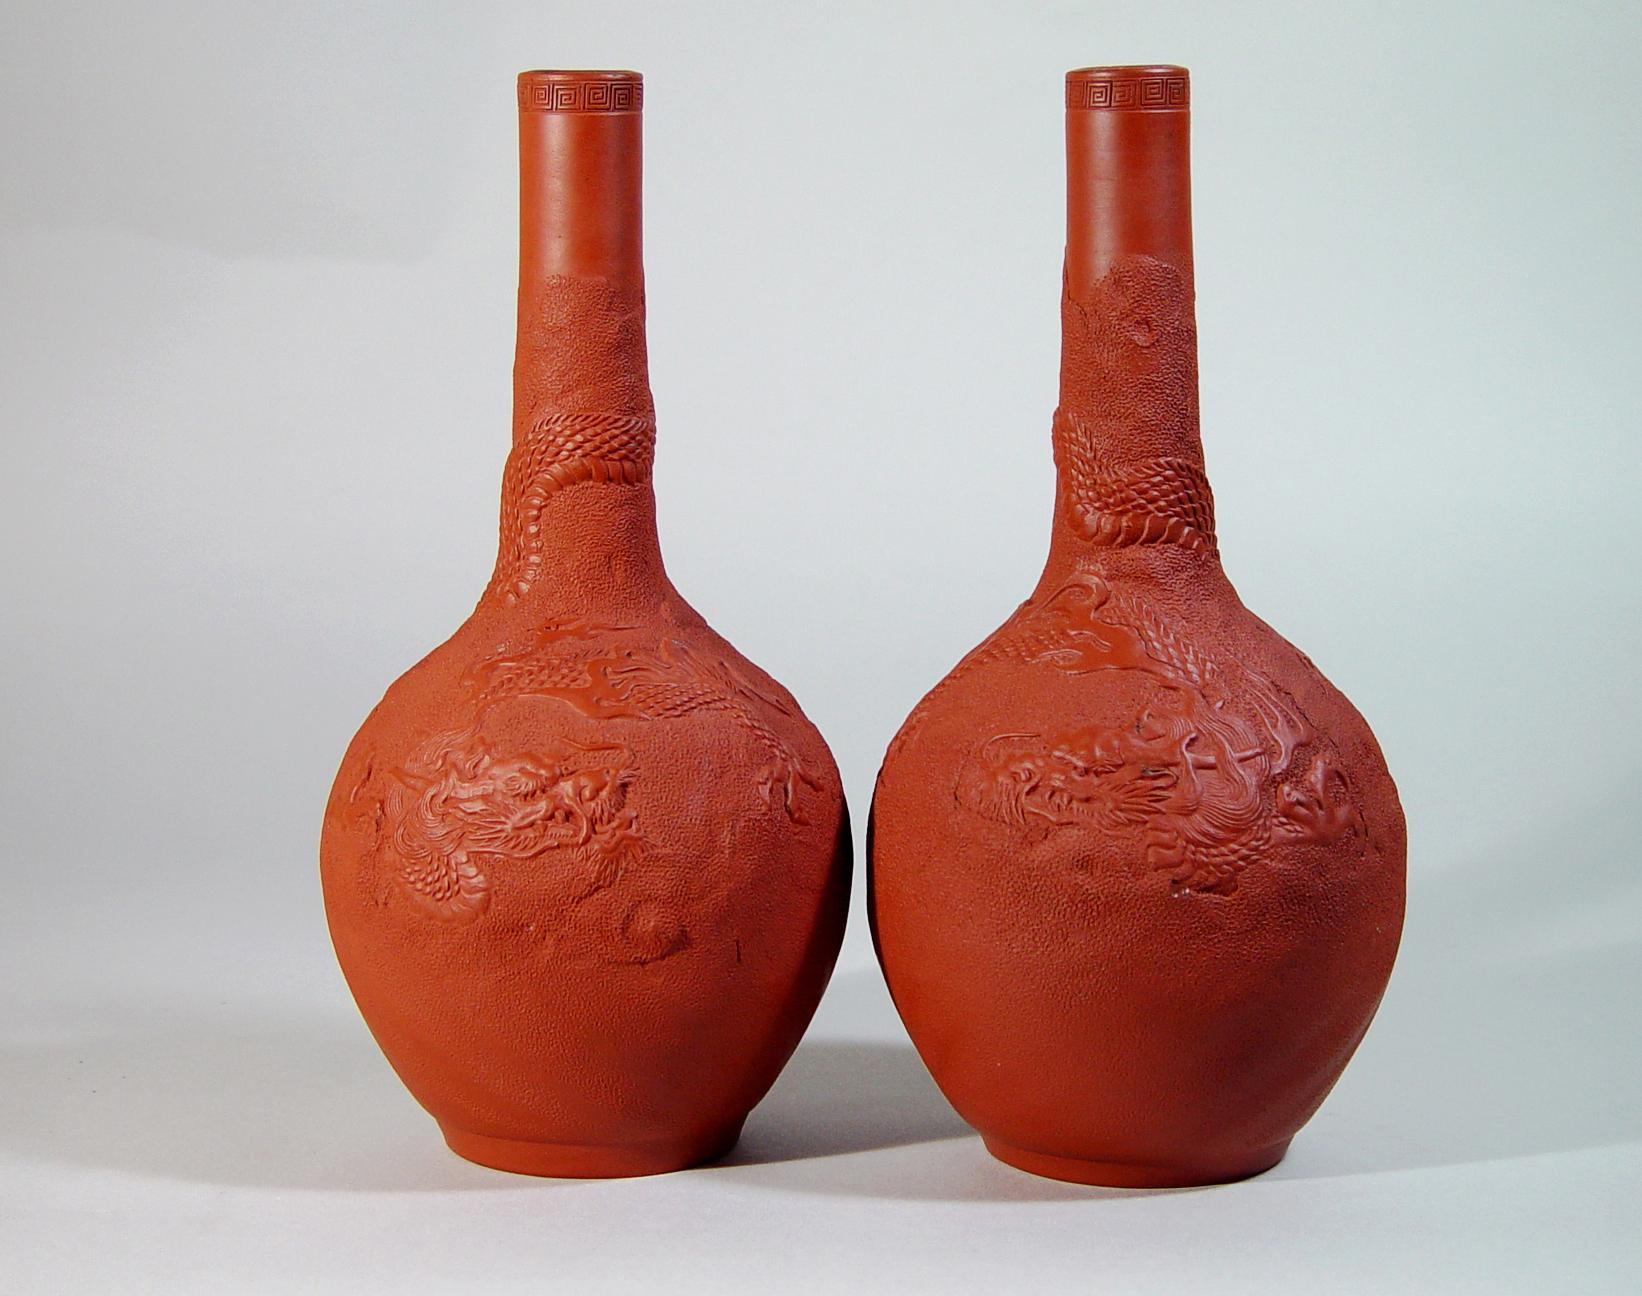 The bottle-form redware vases are decorated with a moulded design of a three-clawed scaled dragon, its tail and body entwining the vase against a pricked raised ground. The rim with a band of Greek key design.

Marks: square mark: Dai Nihon